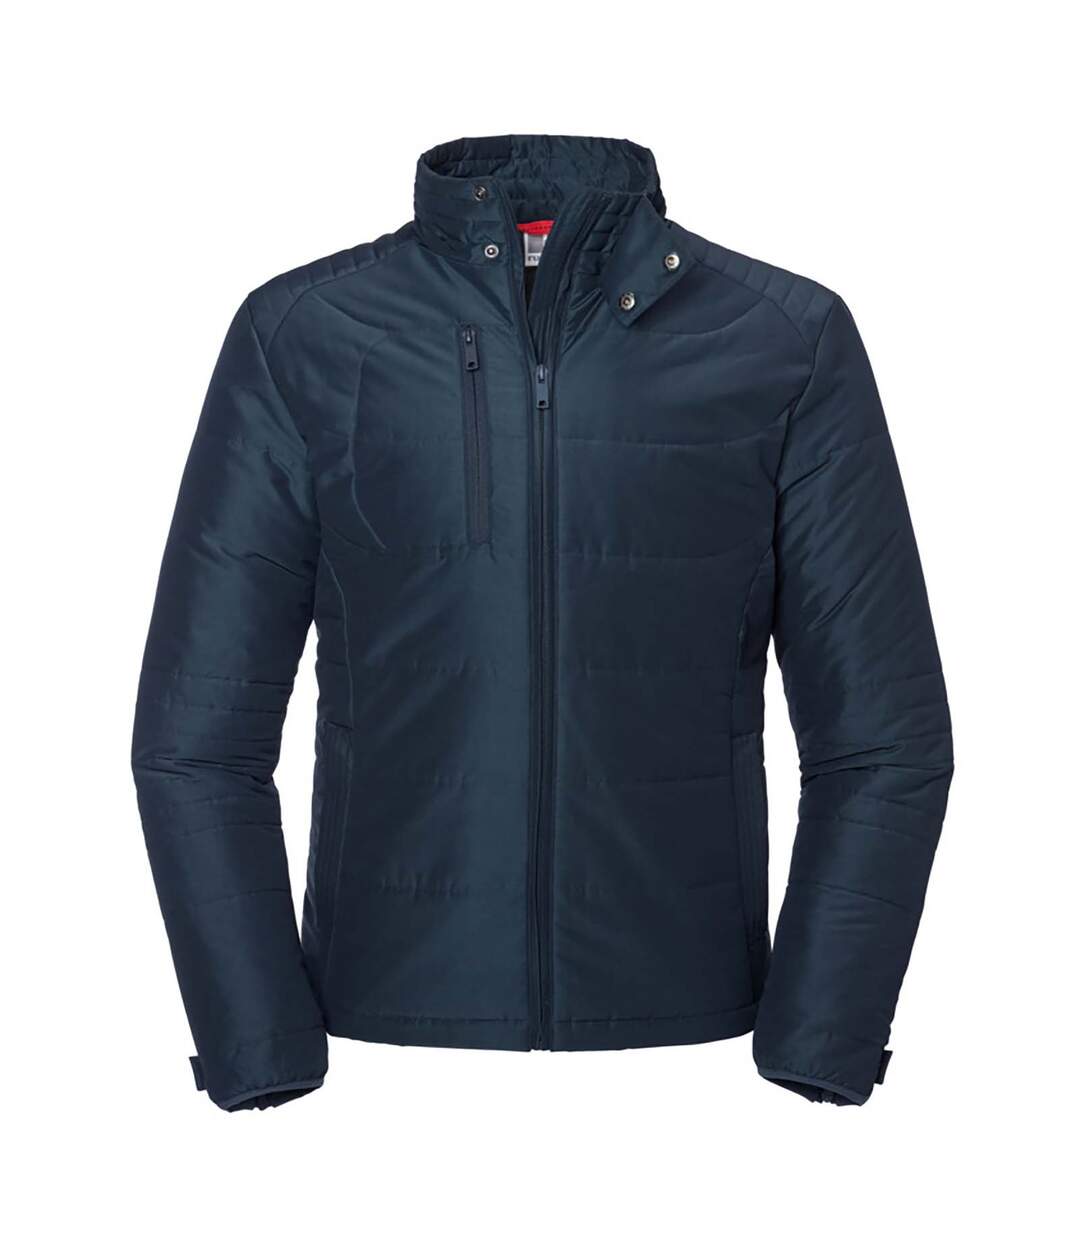 Russell Mens Cross Jacket (French Navy)